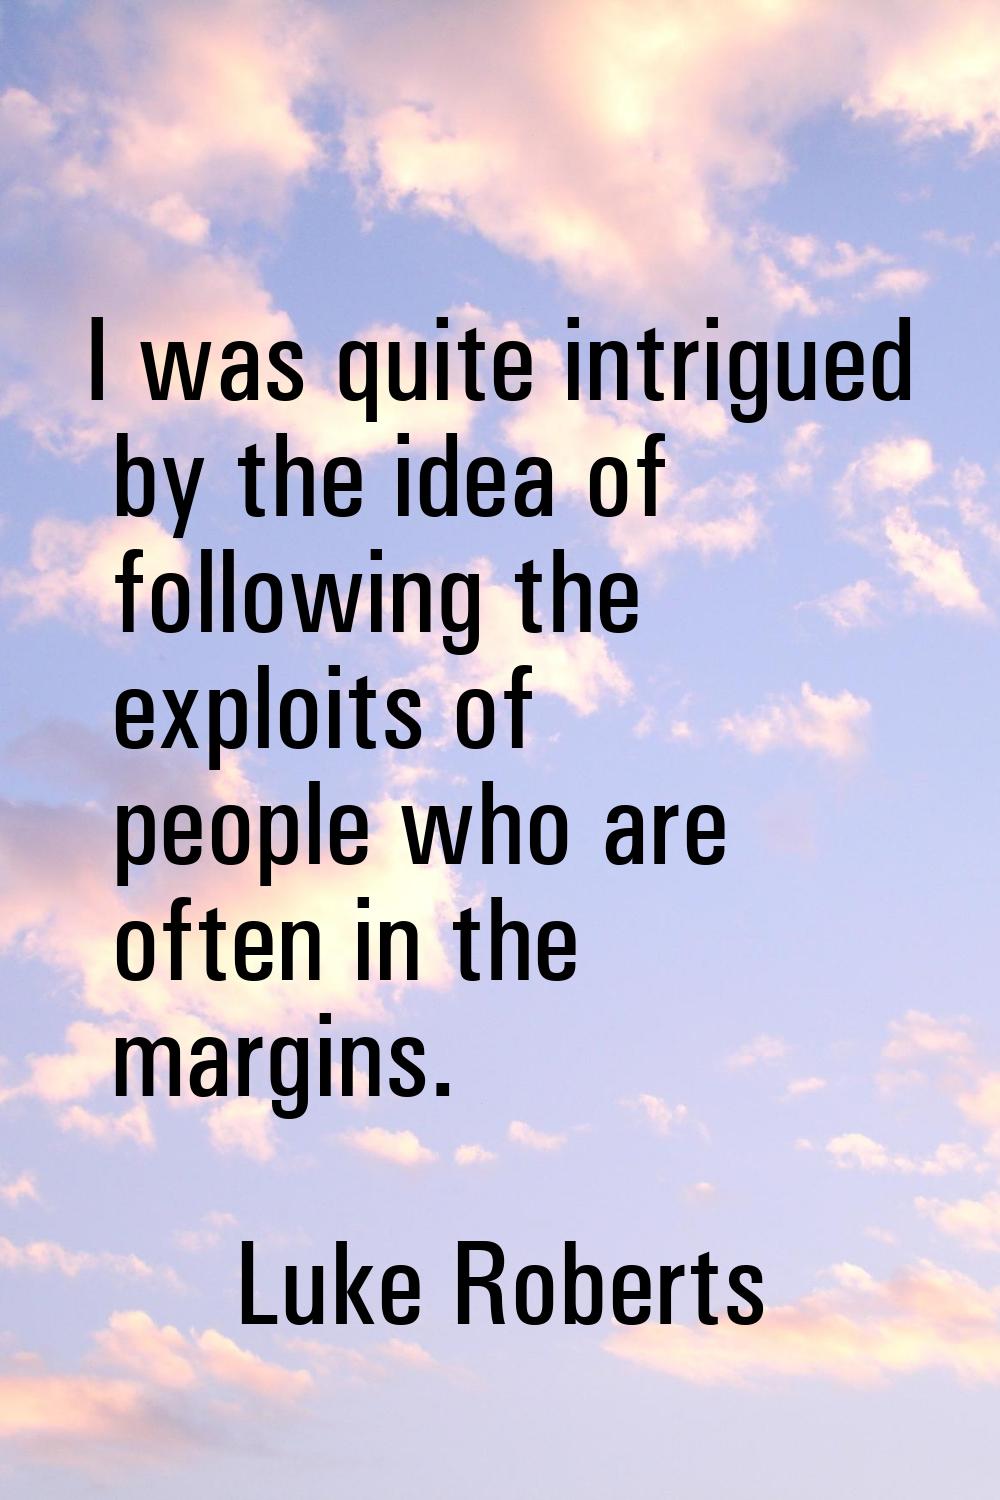 I was quite intrigued by the idea of following the exploits of people who are often in the margins.